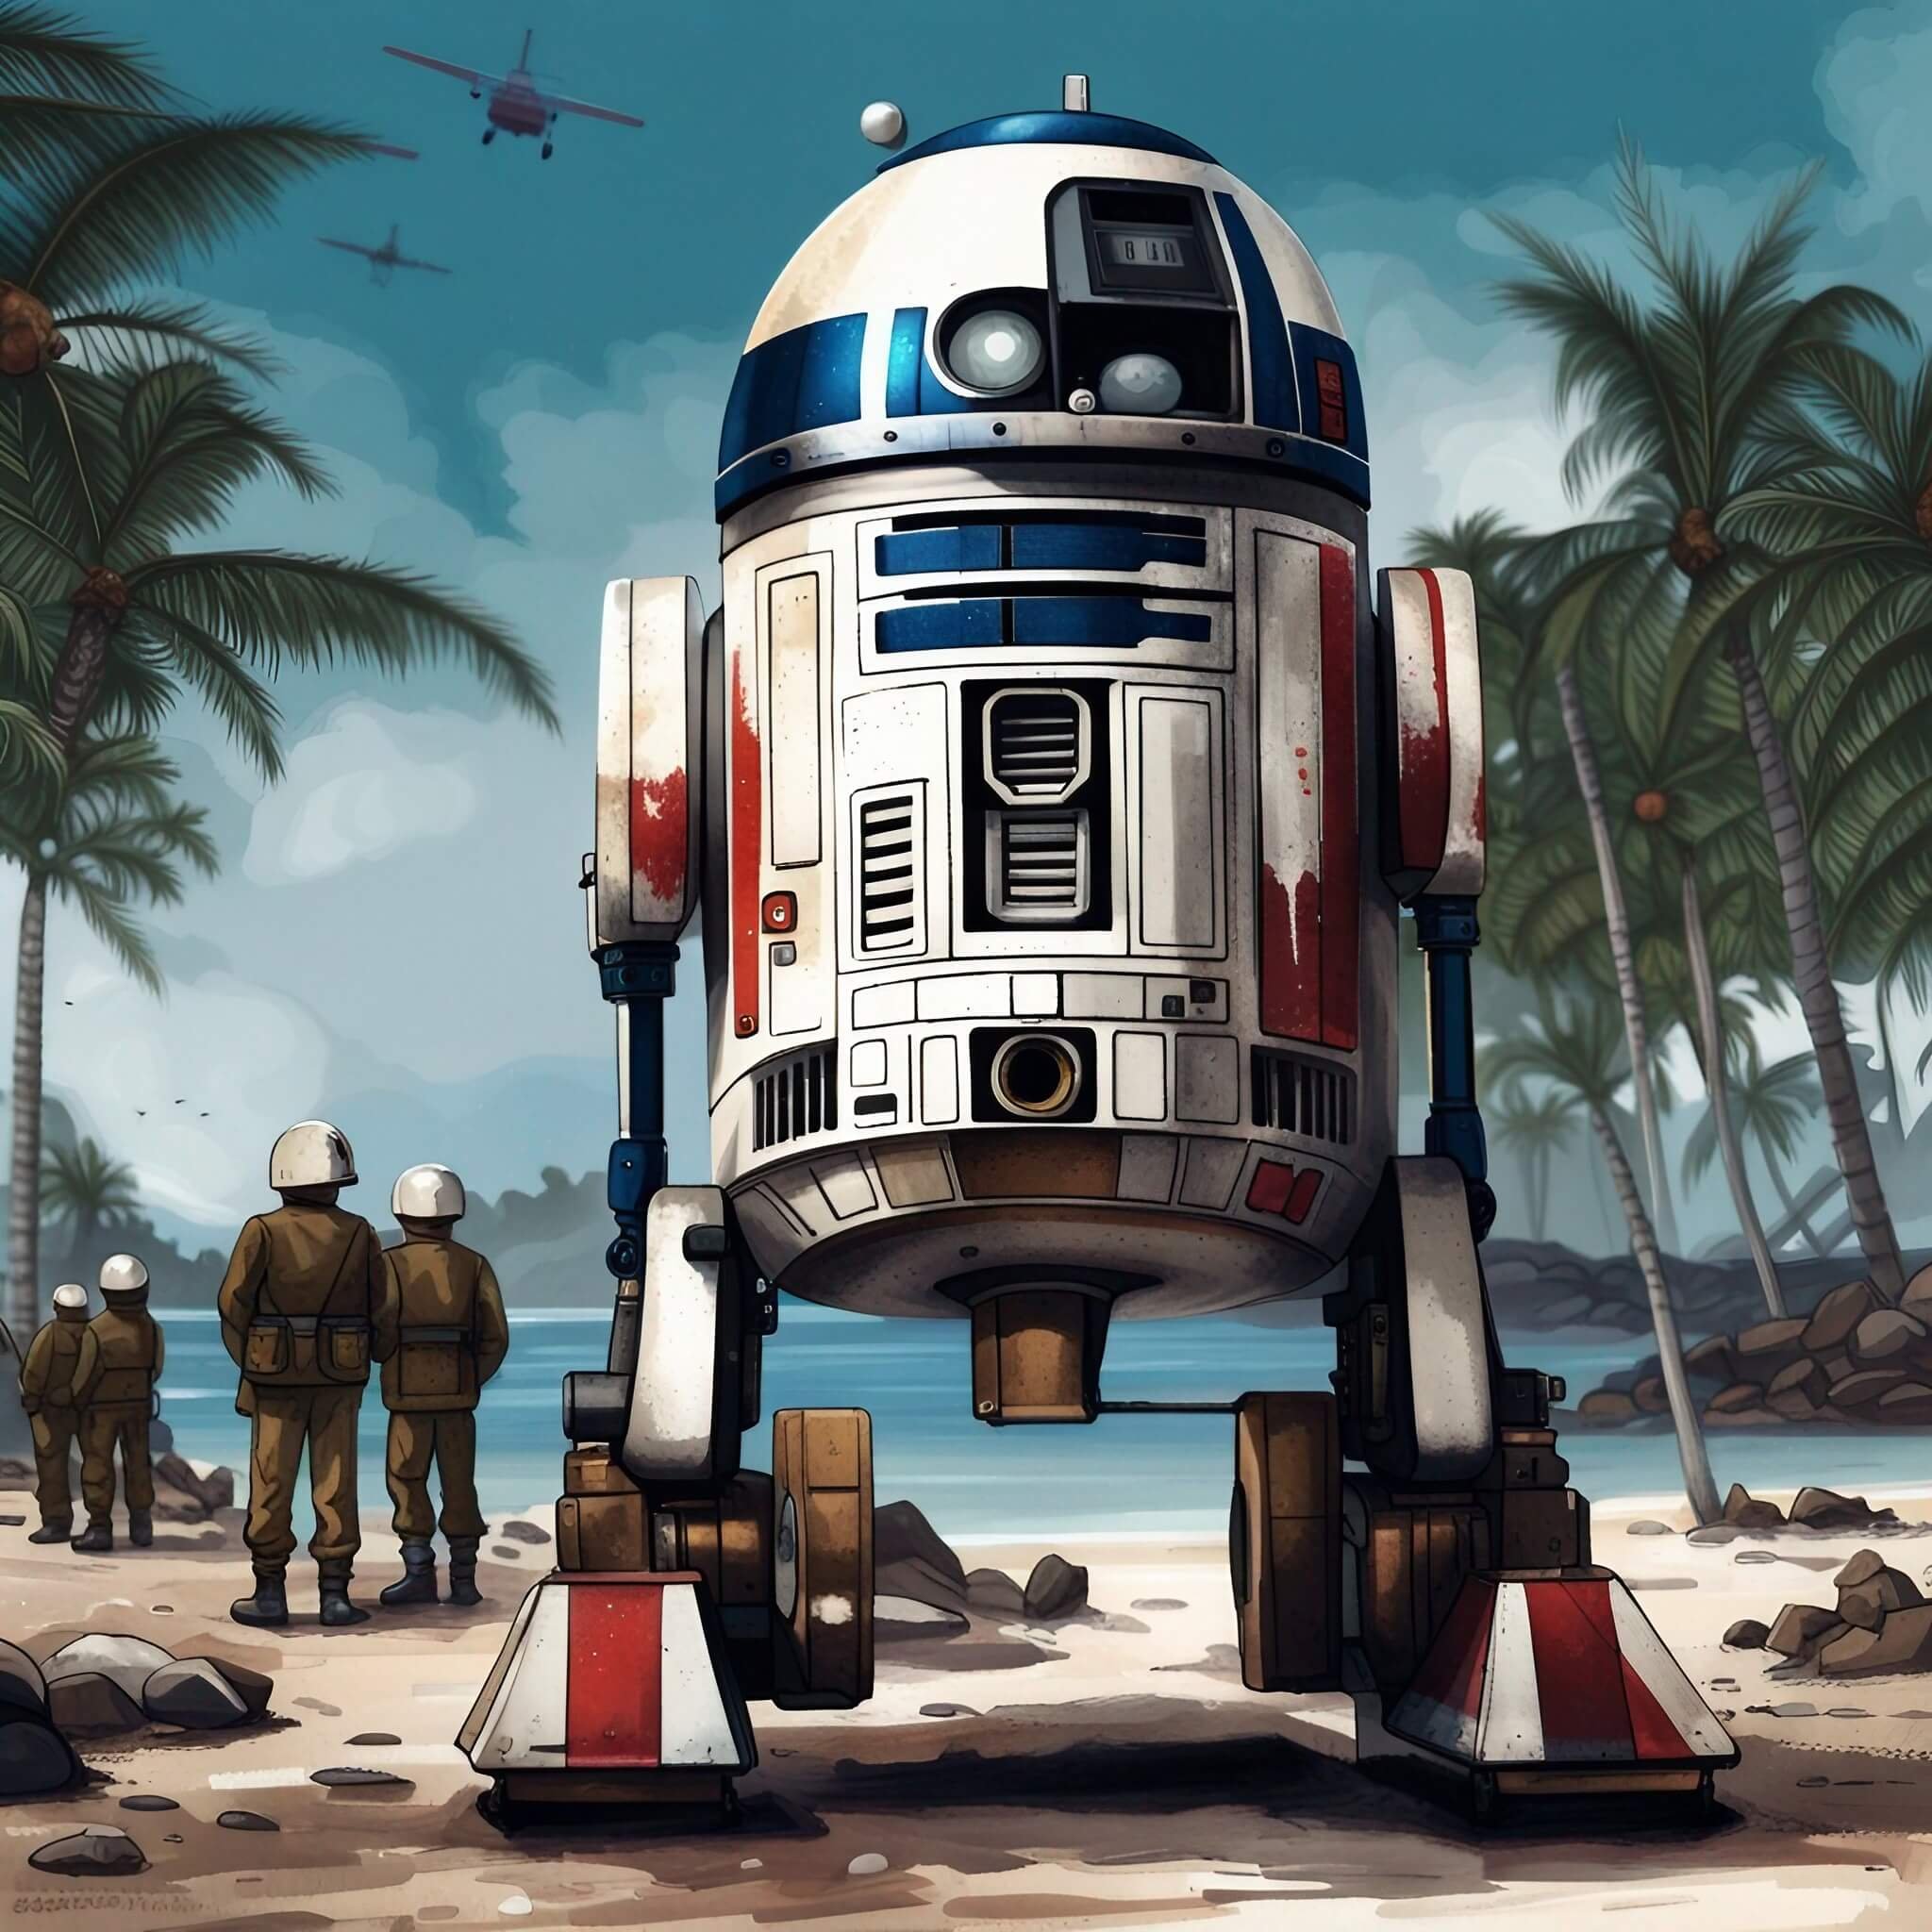 Droids on Pearl Harbor